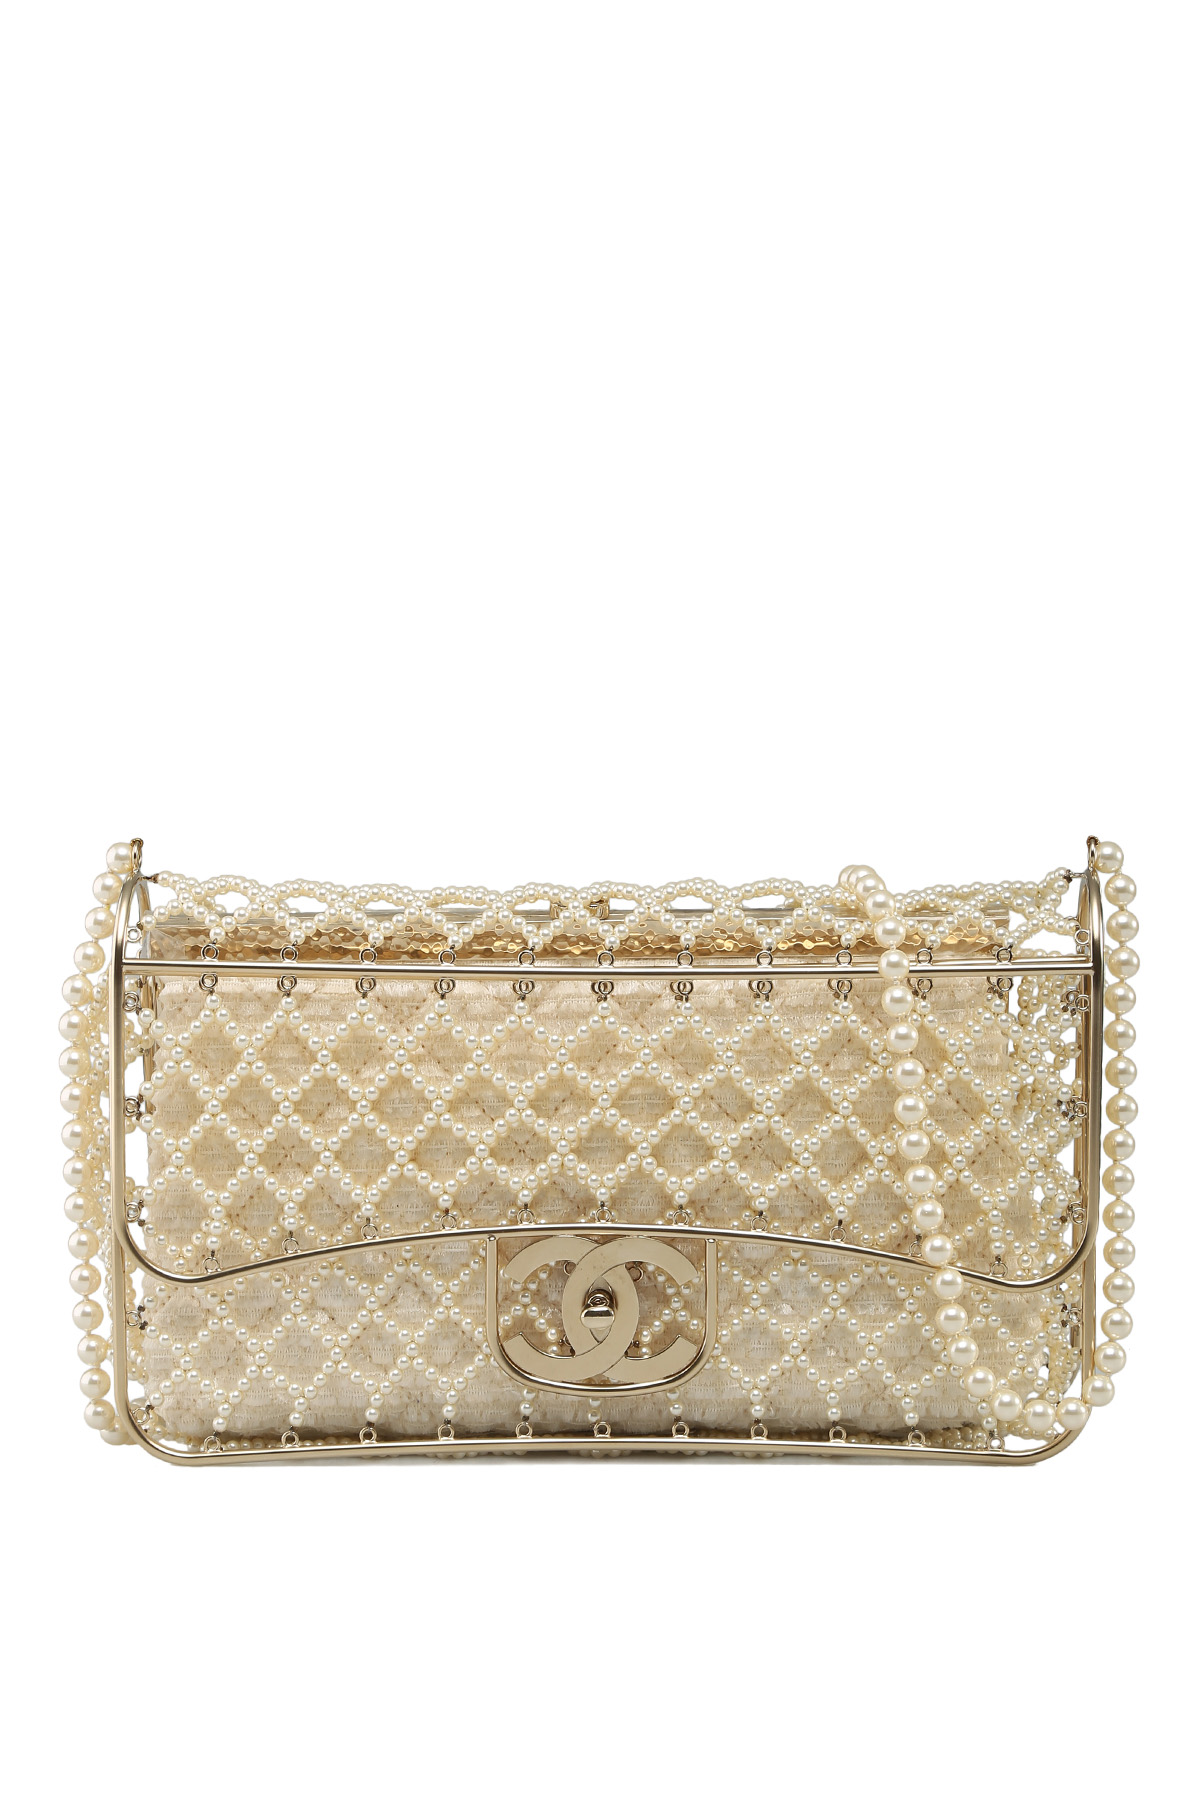 Chanel Pearl Classic Flap Bag in Ivory Faux Pearls, Silk with Pale  Gold-Tone Hardware